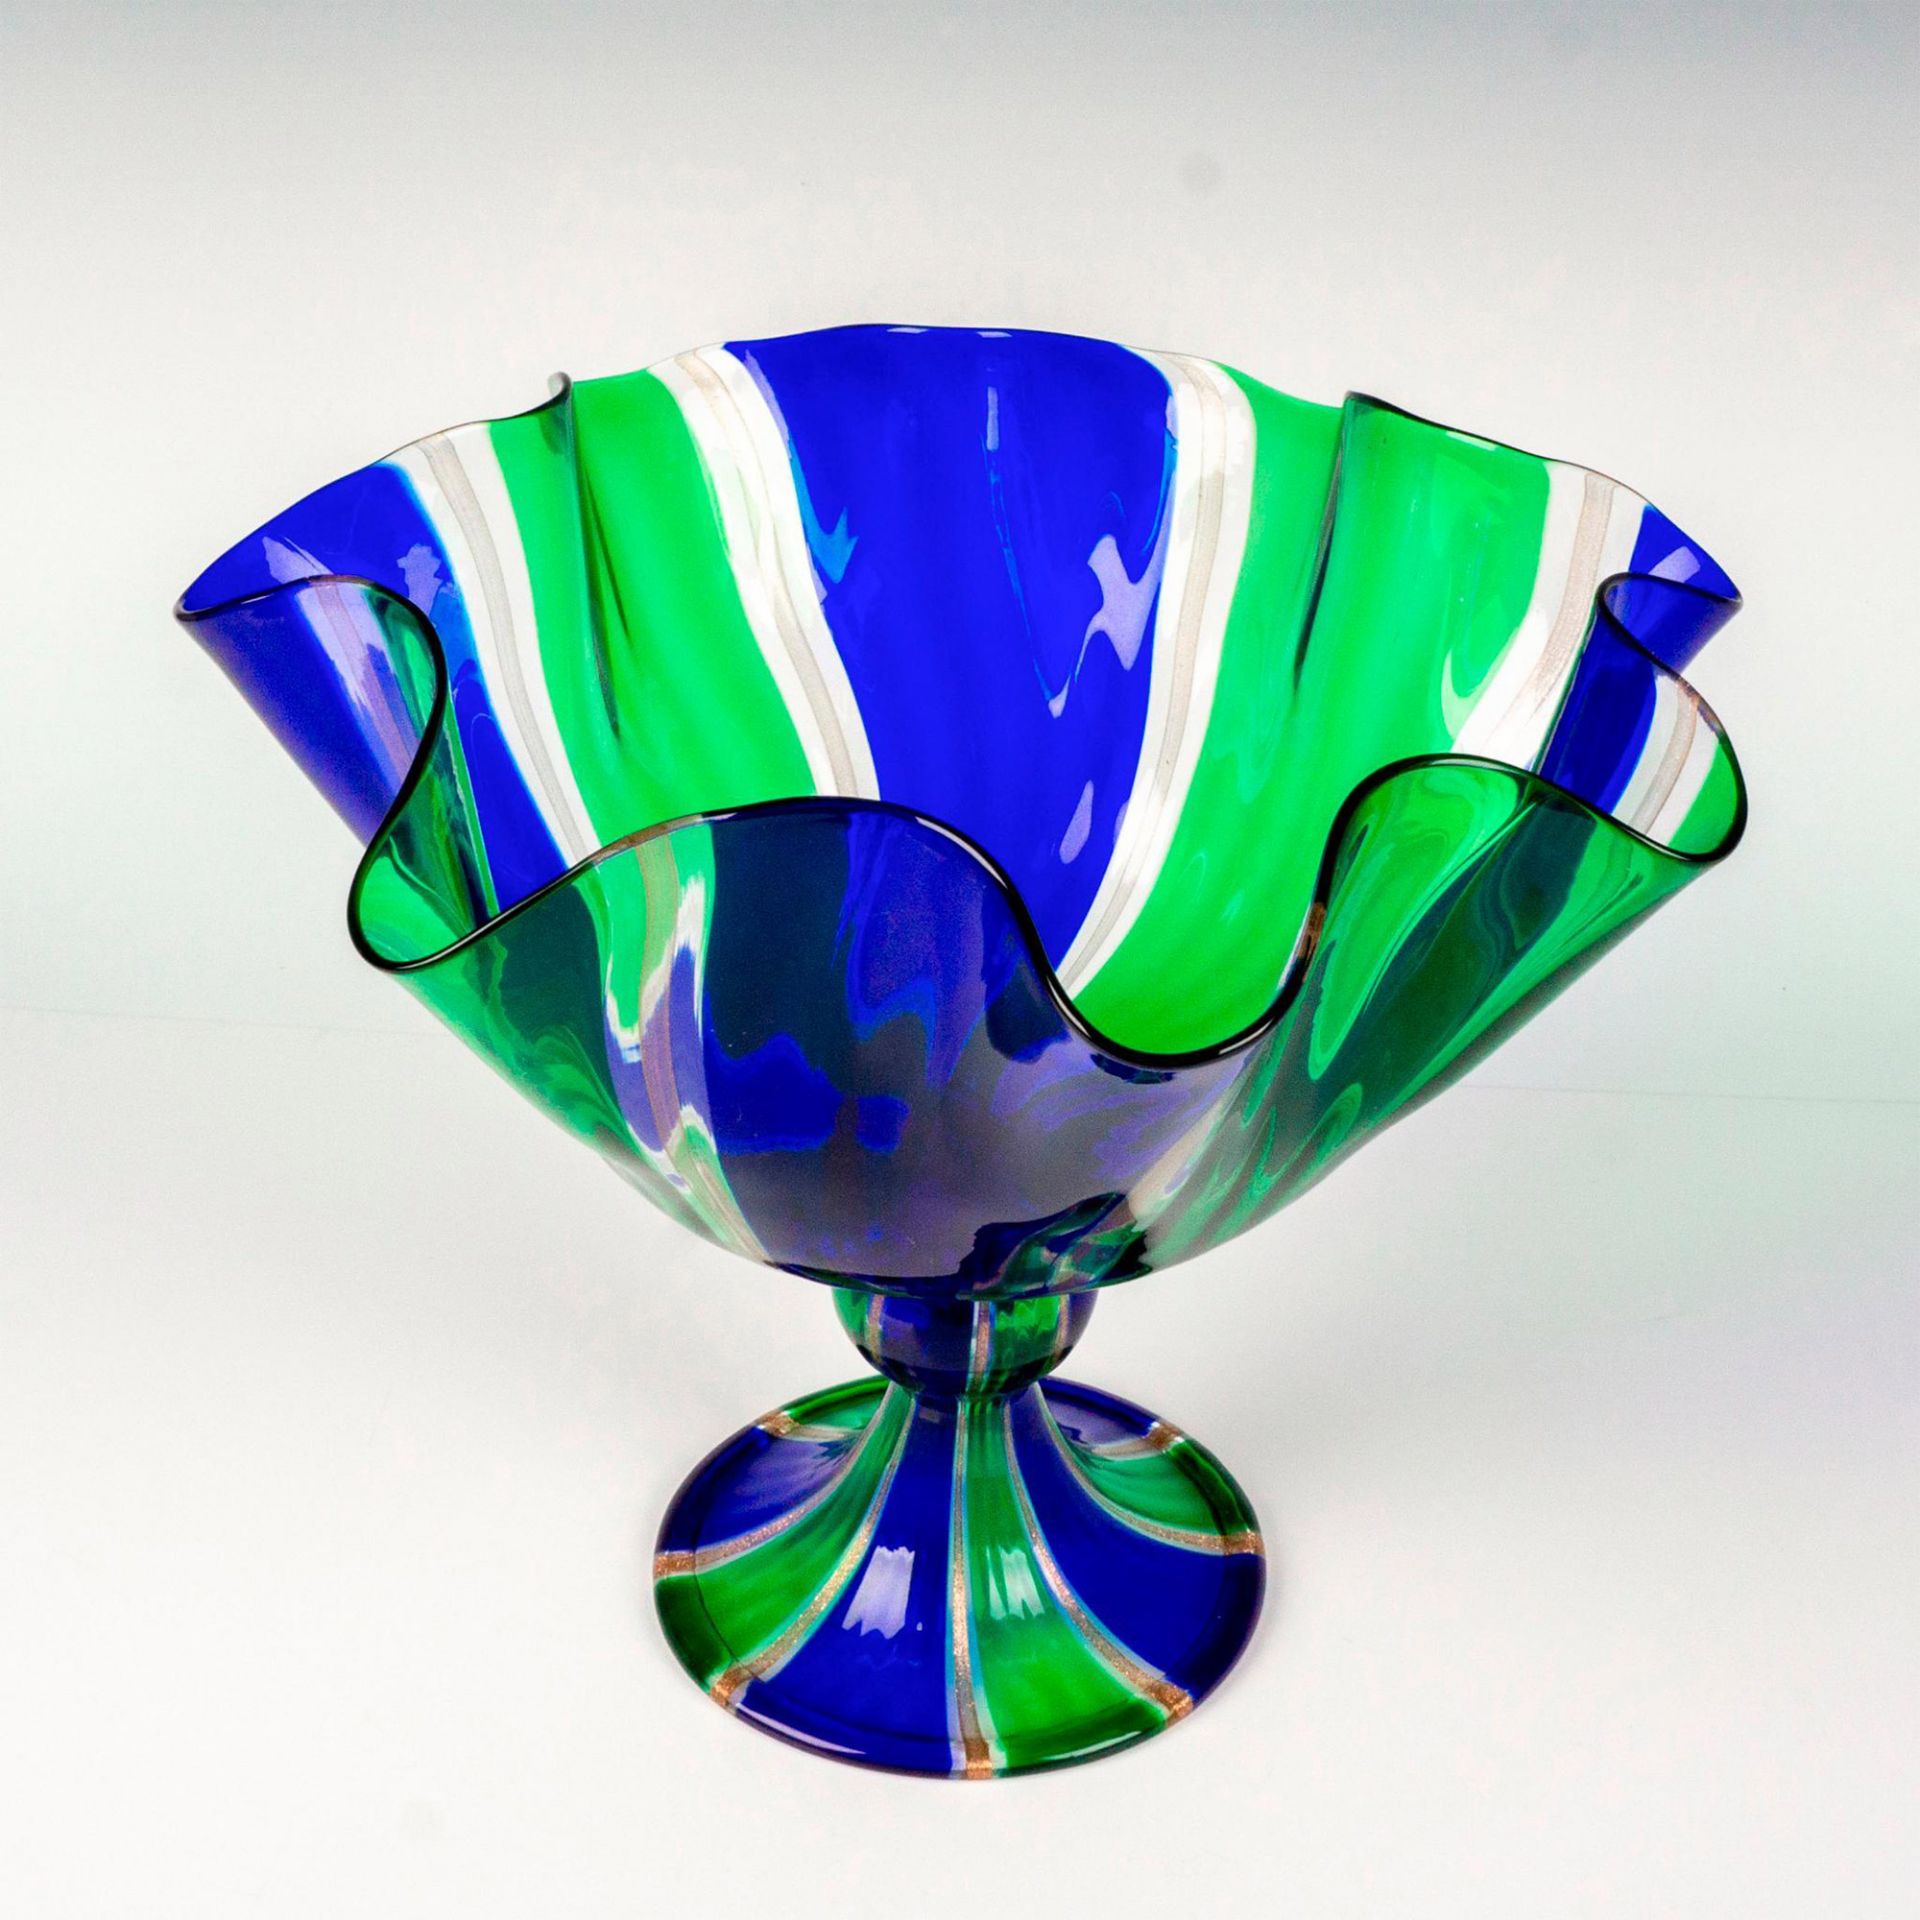 Murano Art Glass Footed Bowl, Cane - Image 2 of 3